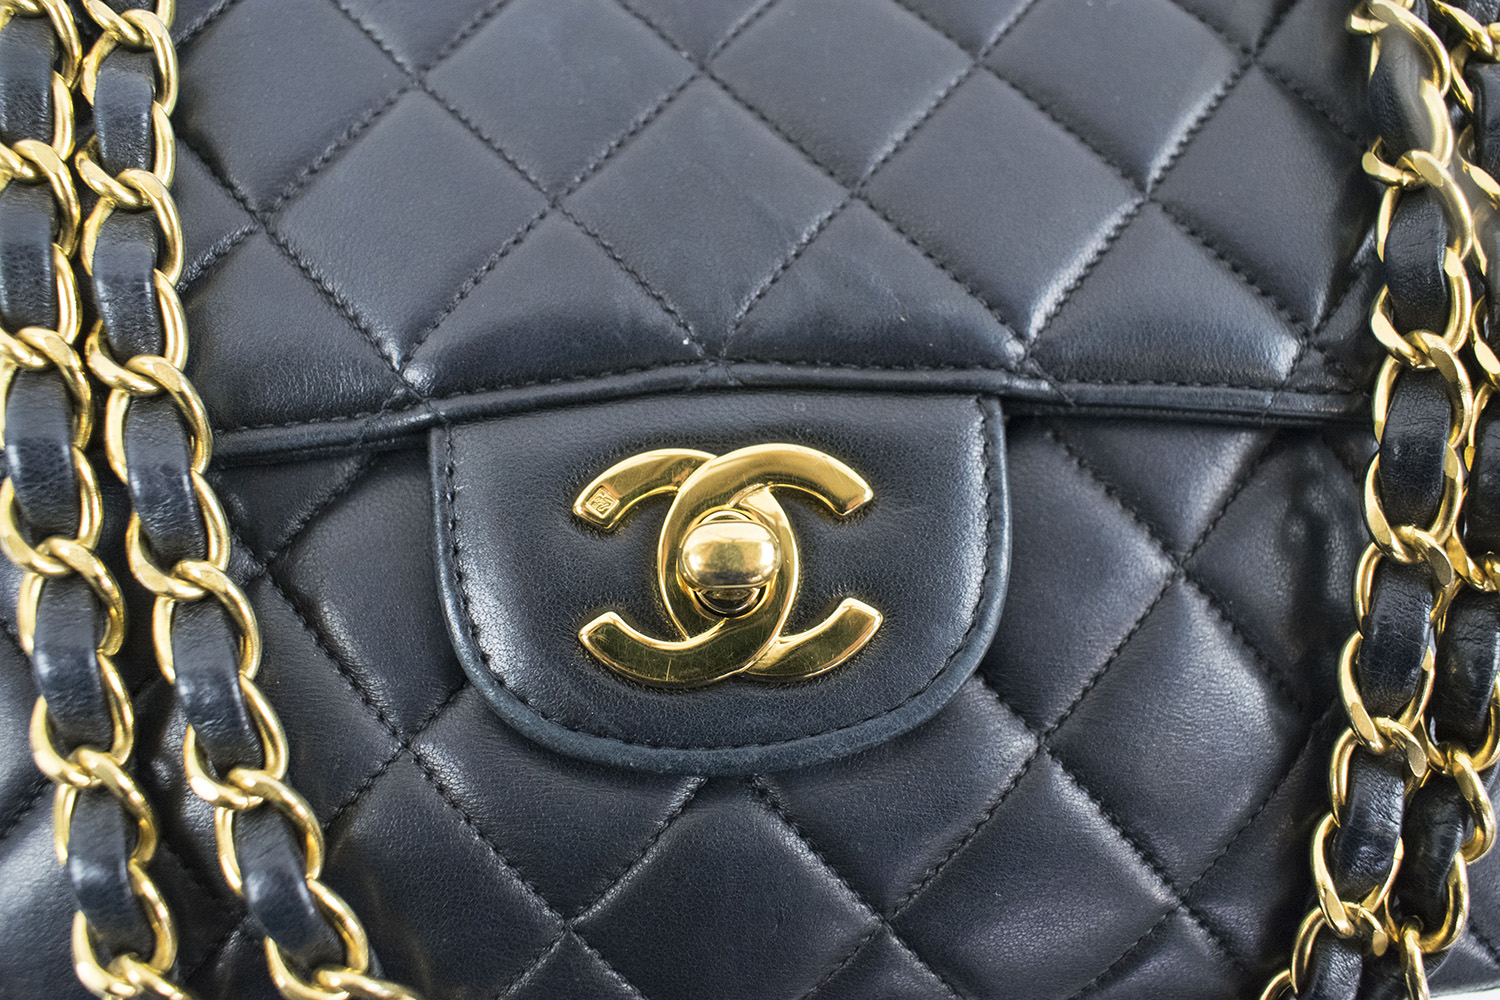 CHANEL DOUBLE SIDED CLASSIC FLAP HANDBAG, black quilted leather with iconic  diamond pattern, gold hardware, chain and leather intervowen shoulder strap,  leather matching interior, inside sticker 4582565, 22cm x 14cm H x